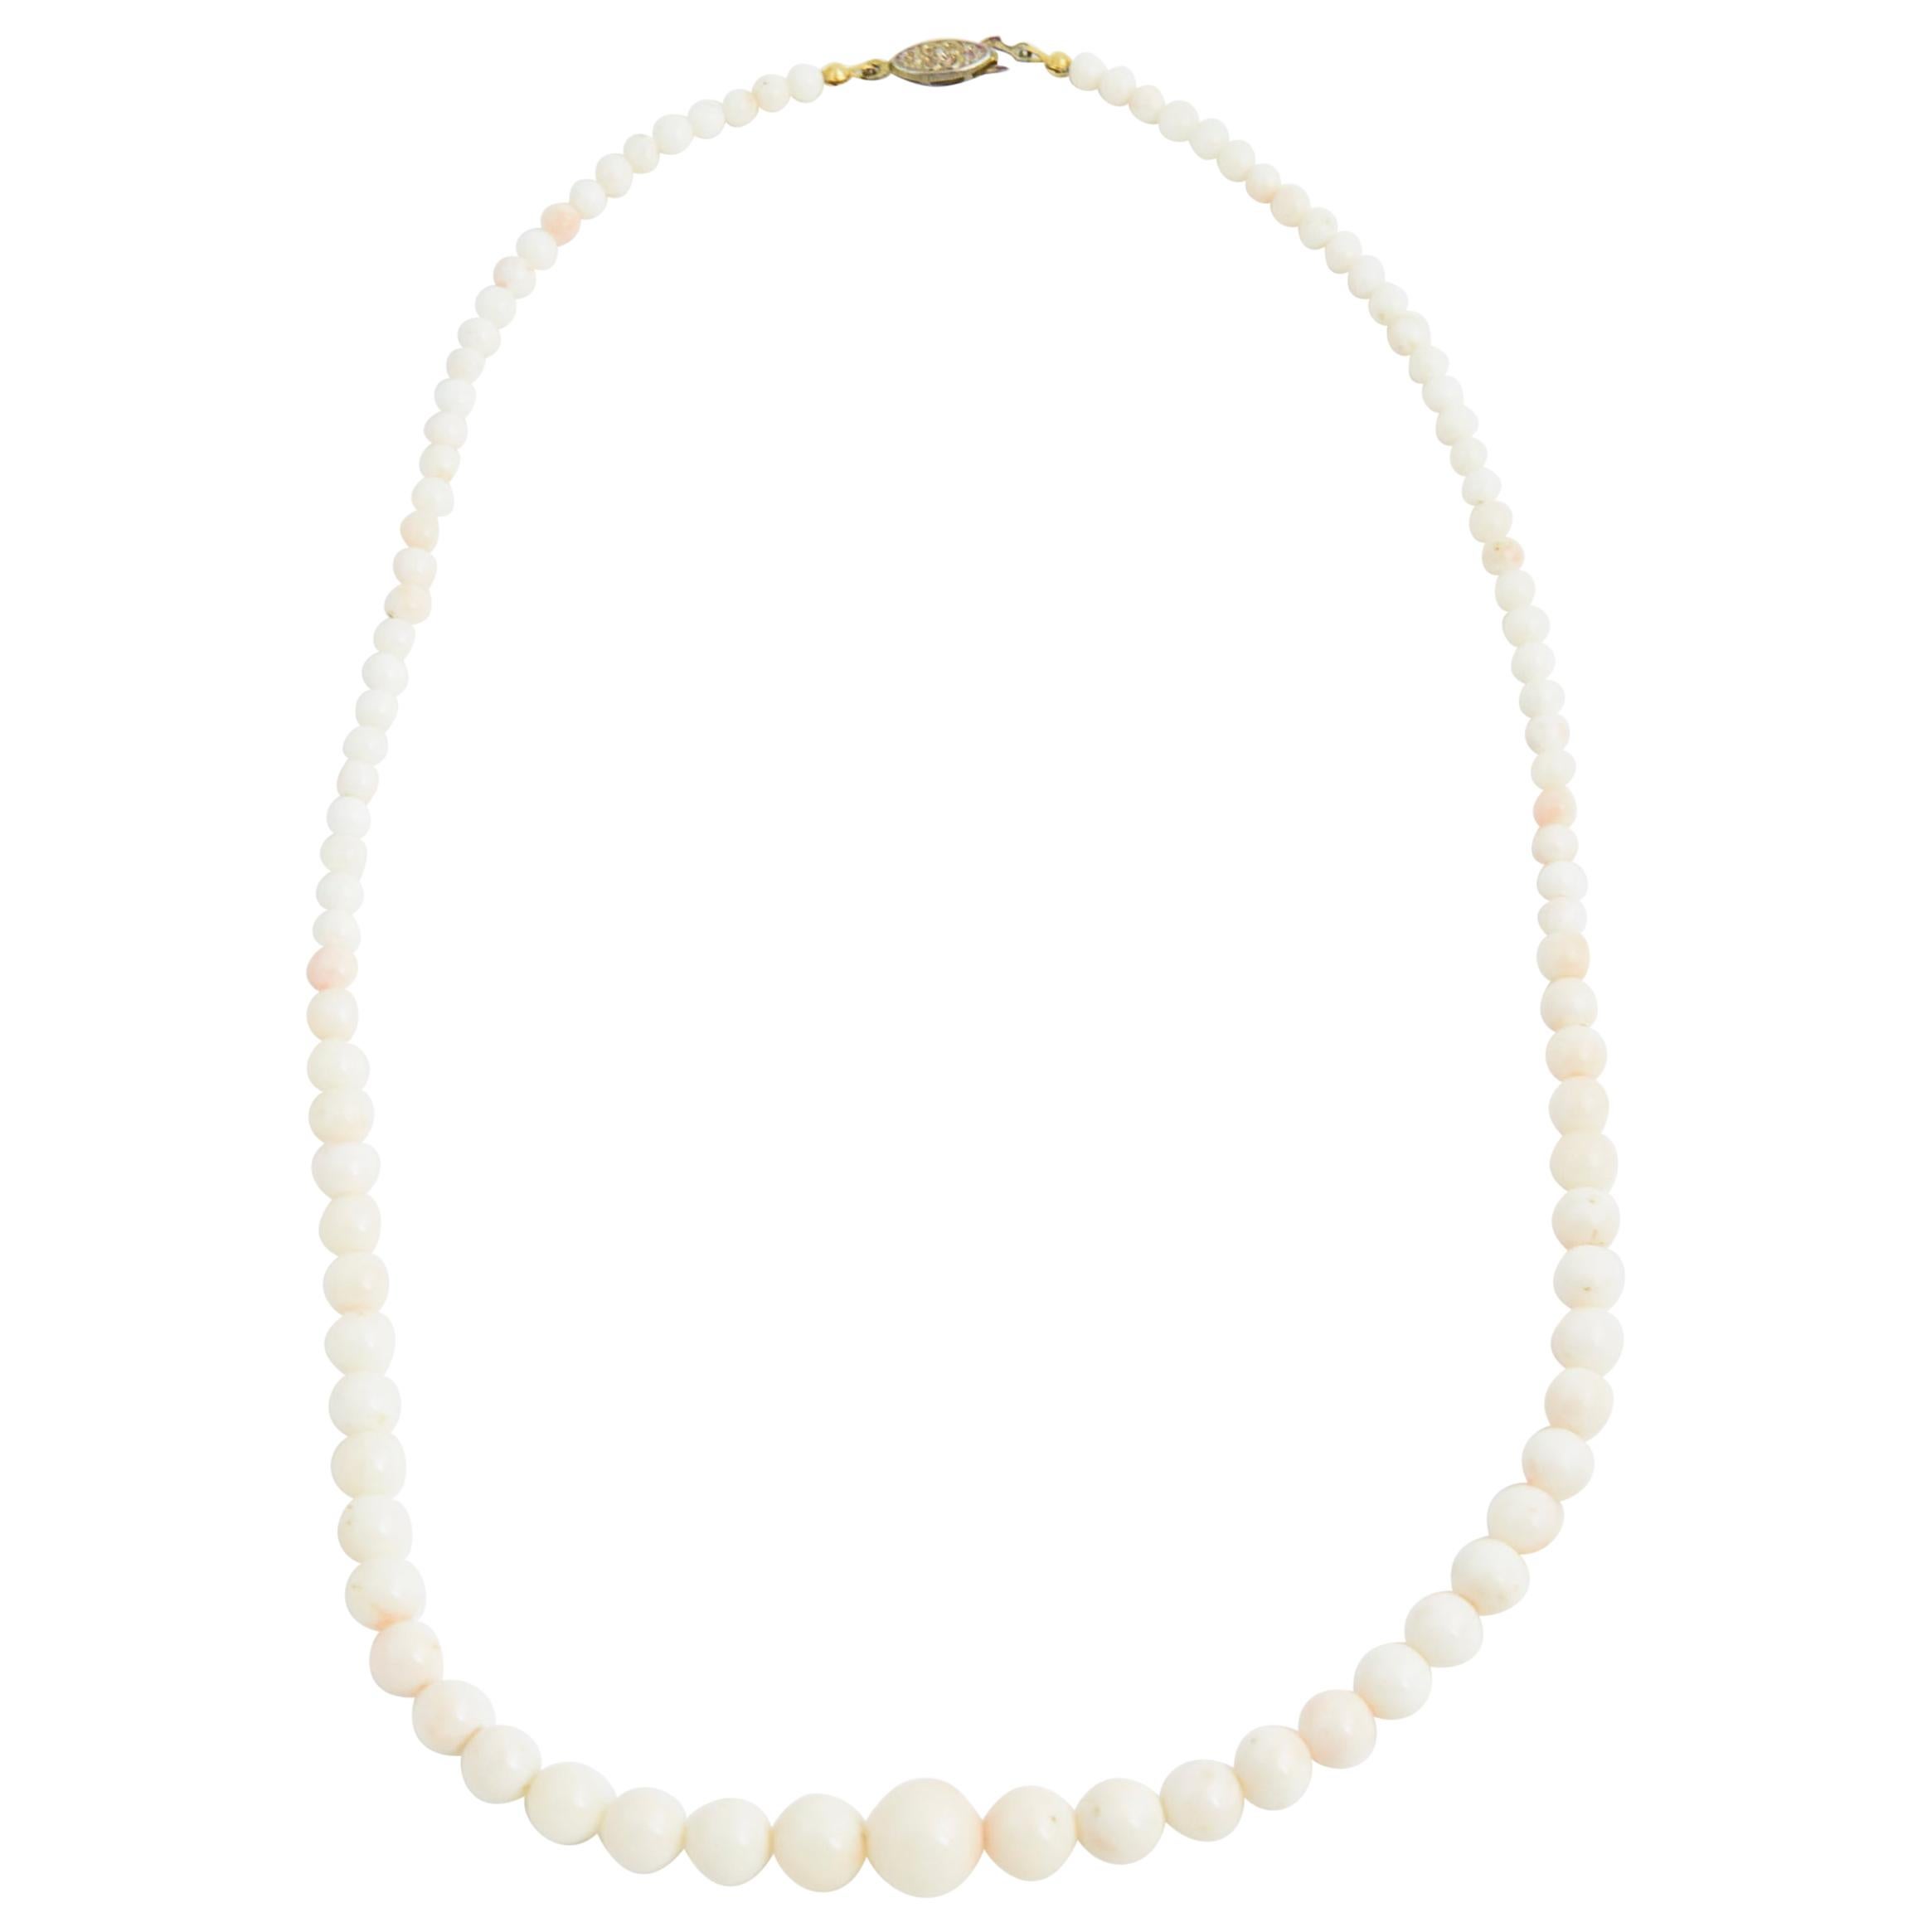 Graduated Angel Skin Coral Bead Necklace For Sale